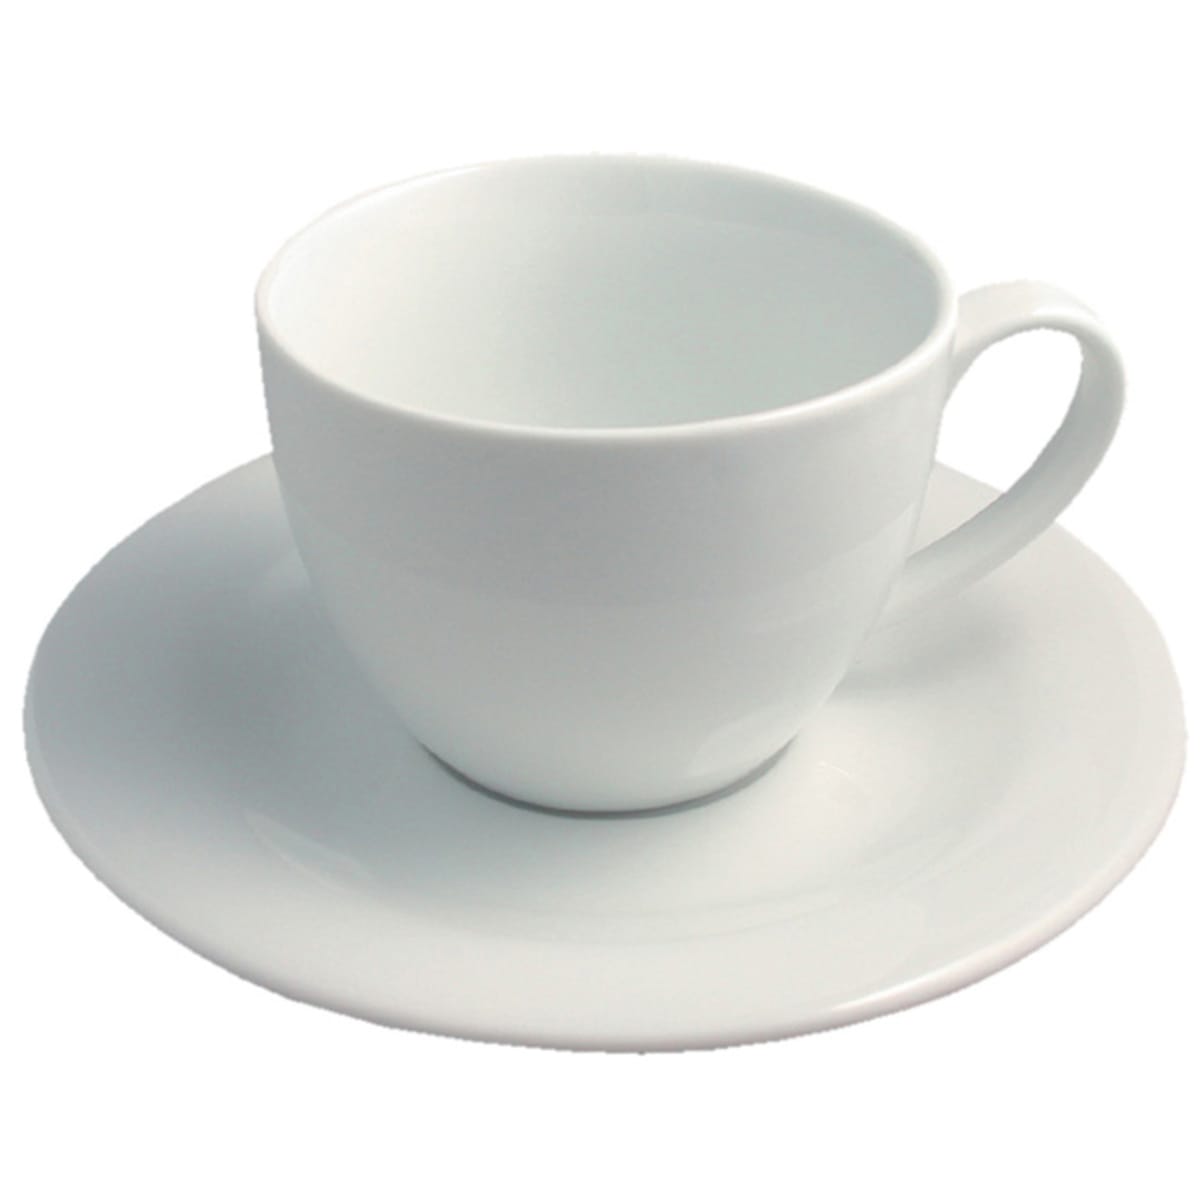 Revol coffee cup and saucer - black